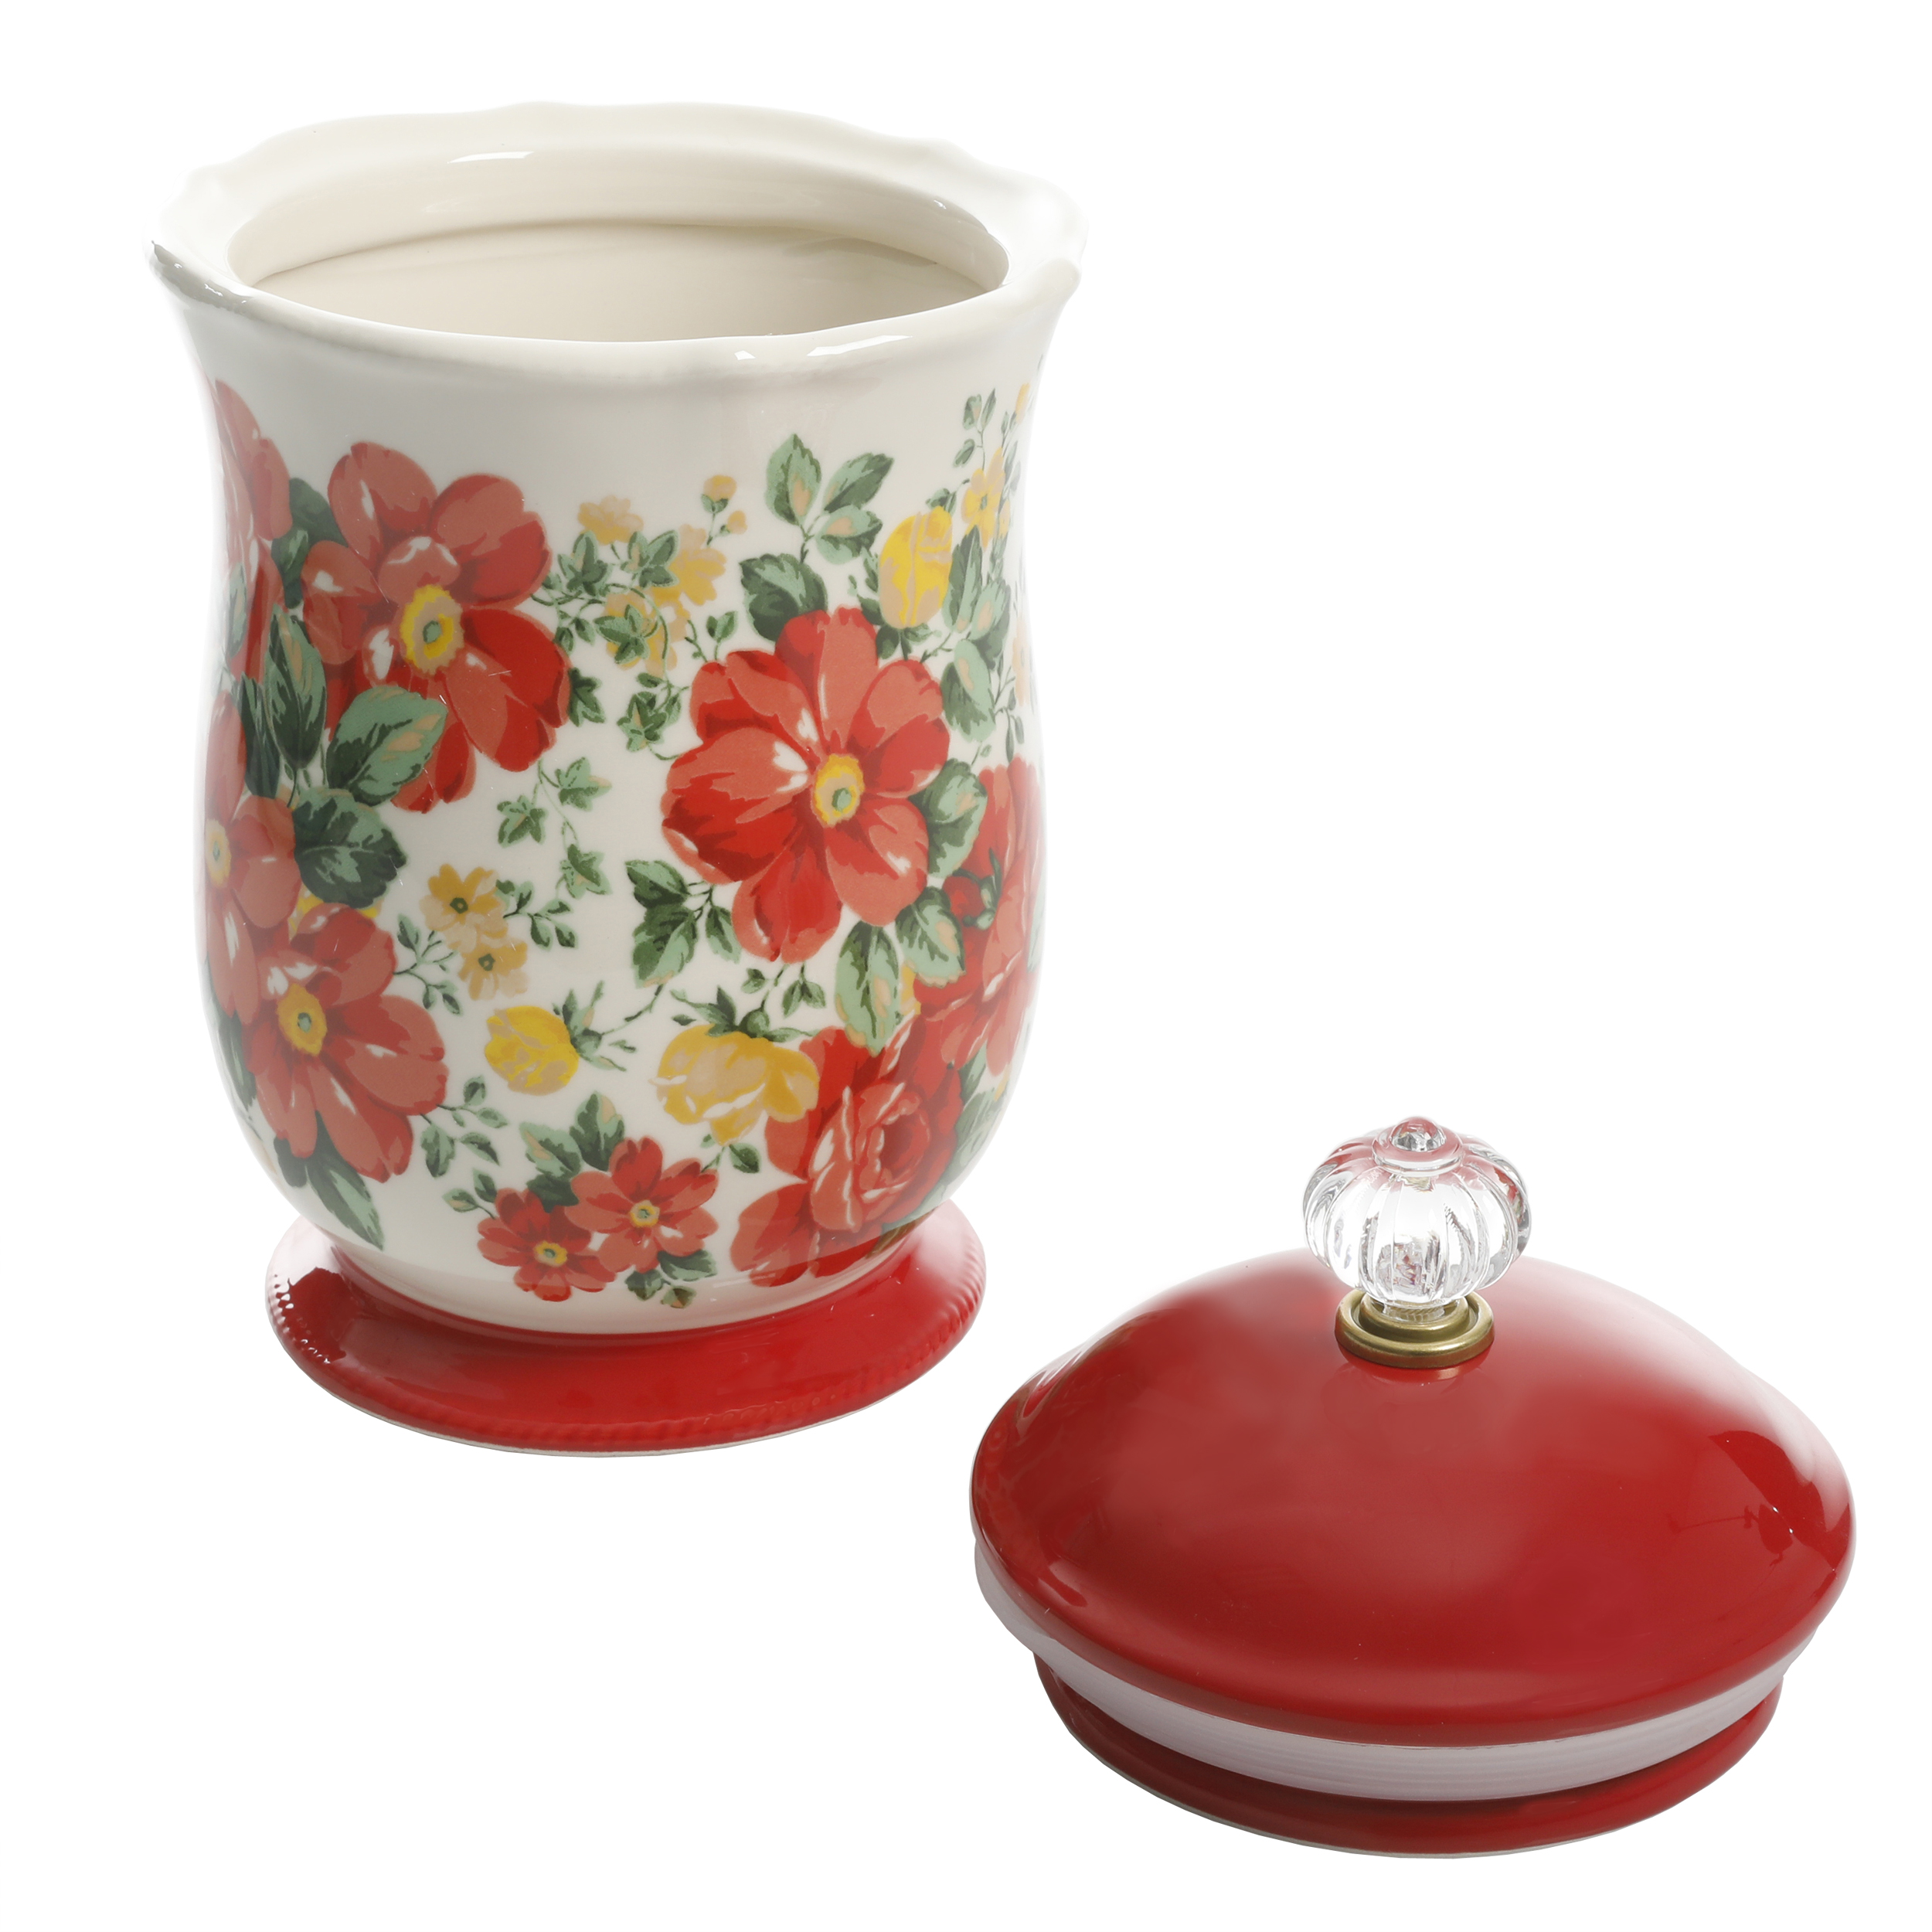 The Pioneer Woman Vintage Floral Canister with Acrylic Knob, 10" - image 4 of 5